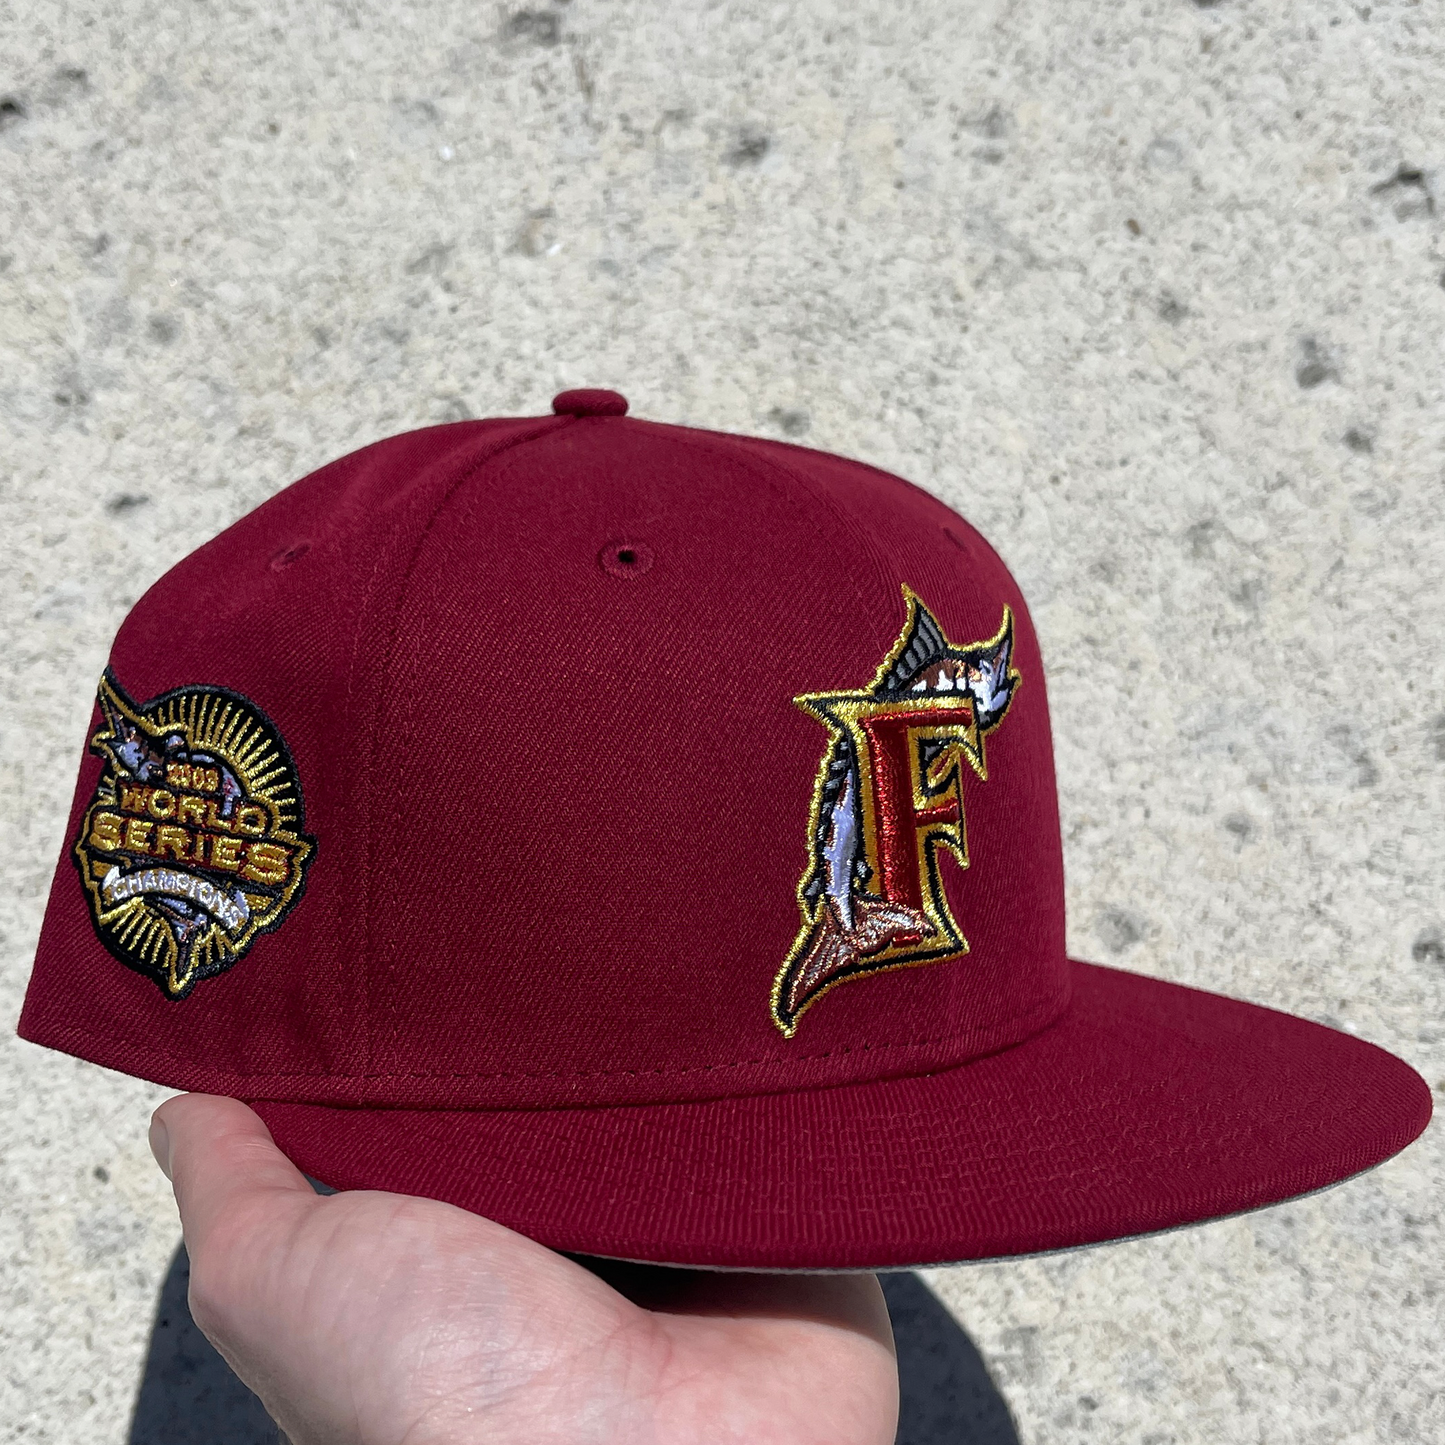 New Era Florida Marlins 59FIFTY Hat - Red